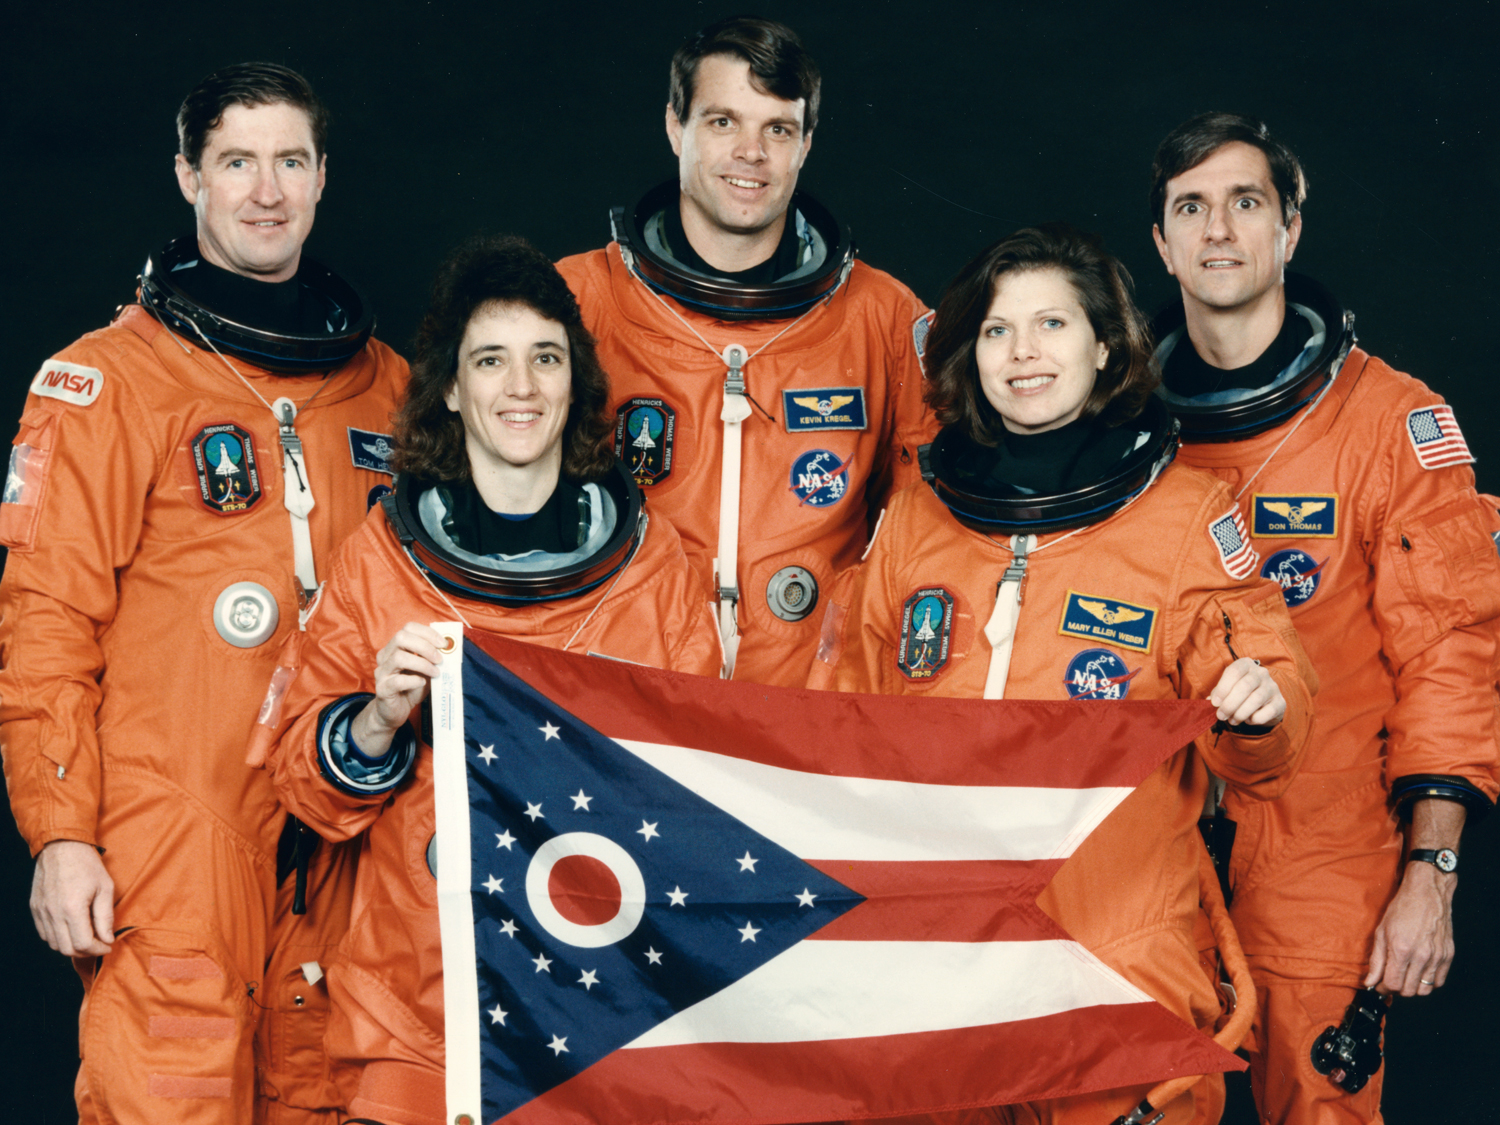  The “All-Ohio” Space Shuttle Crew. 